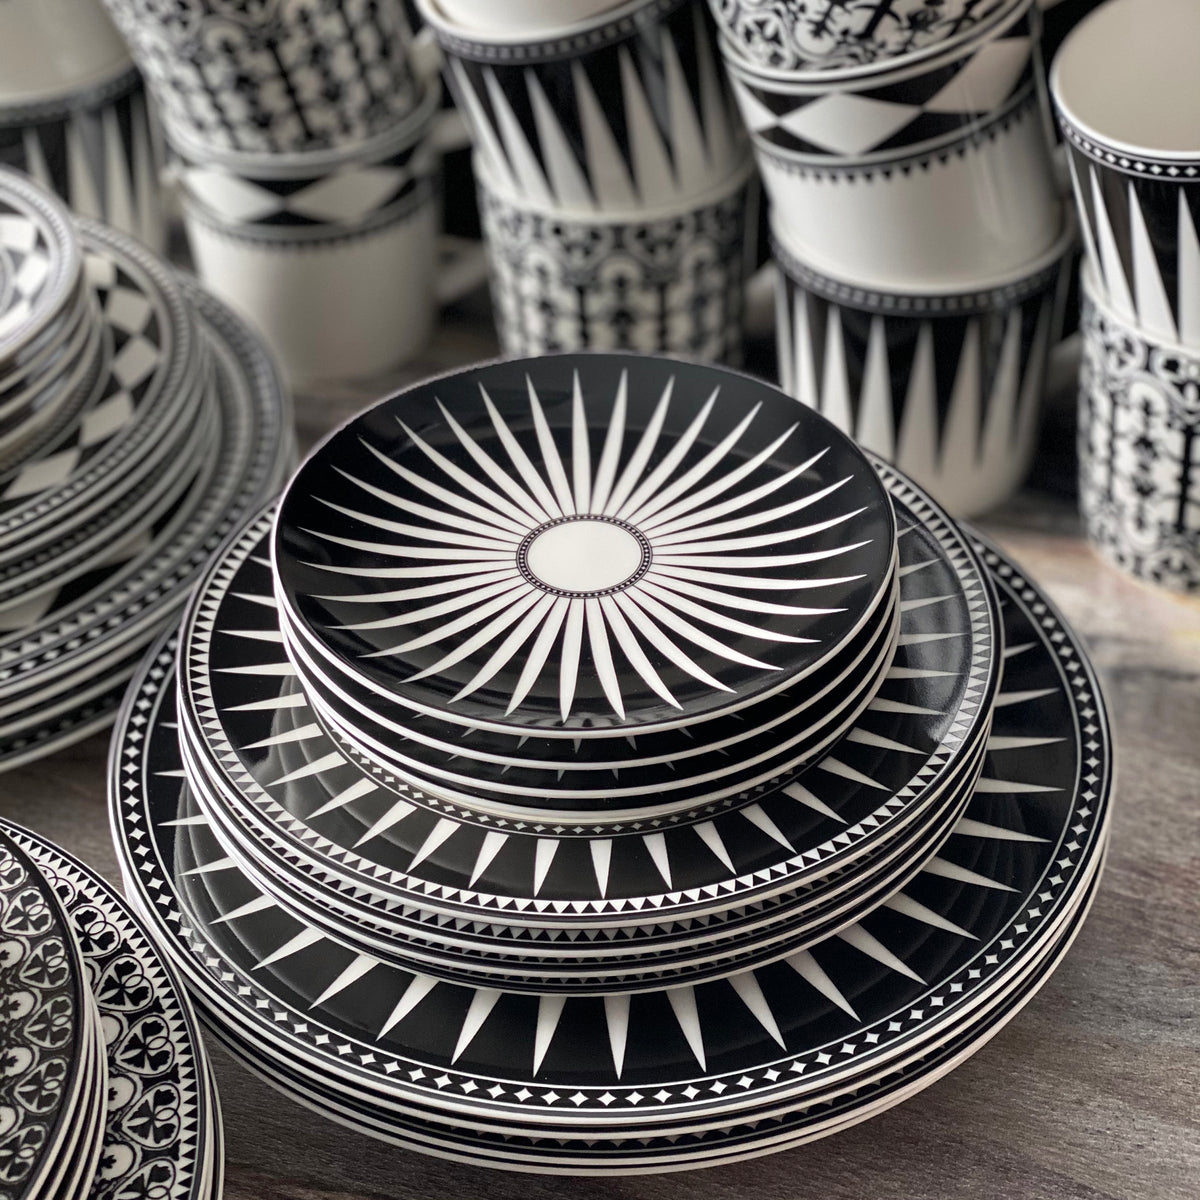 A set of geometric black and white ceramics, specifically the Marrakech 4-Piece Place Setting by Caskata Artisanal Home, on a table in Marrakech.